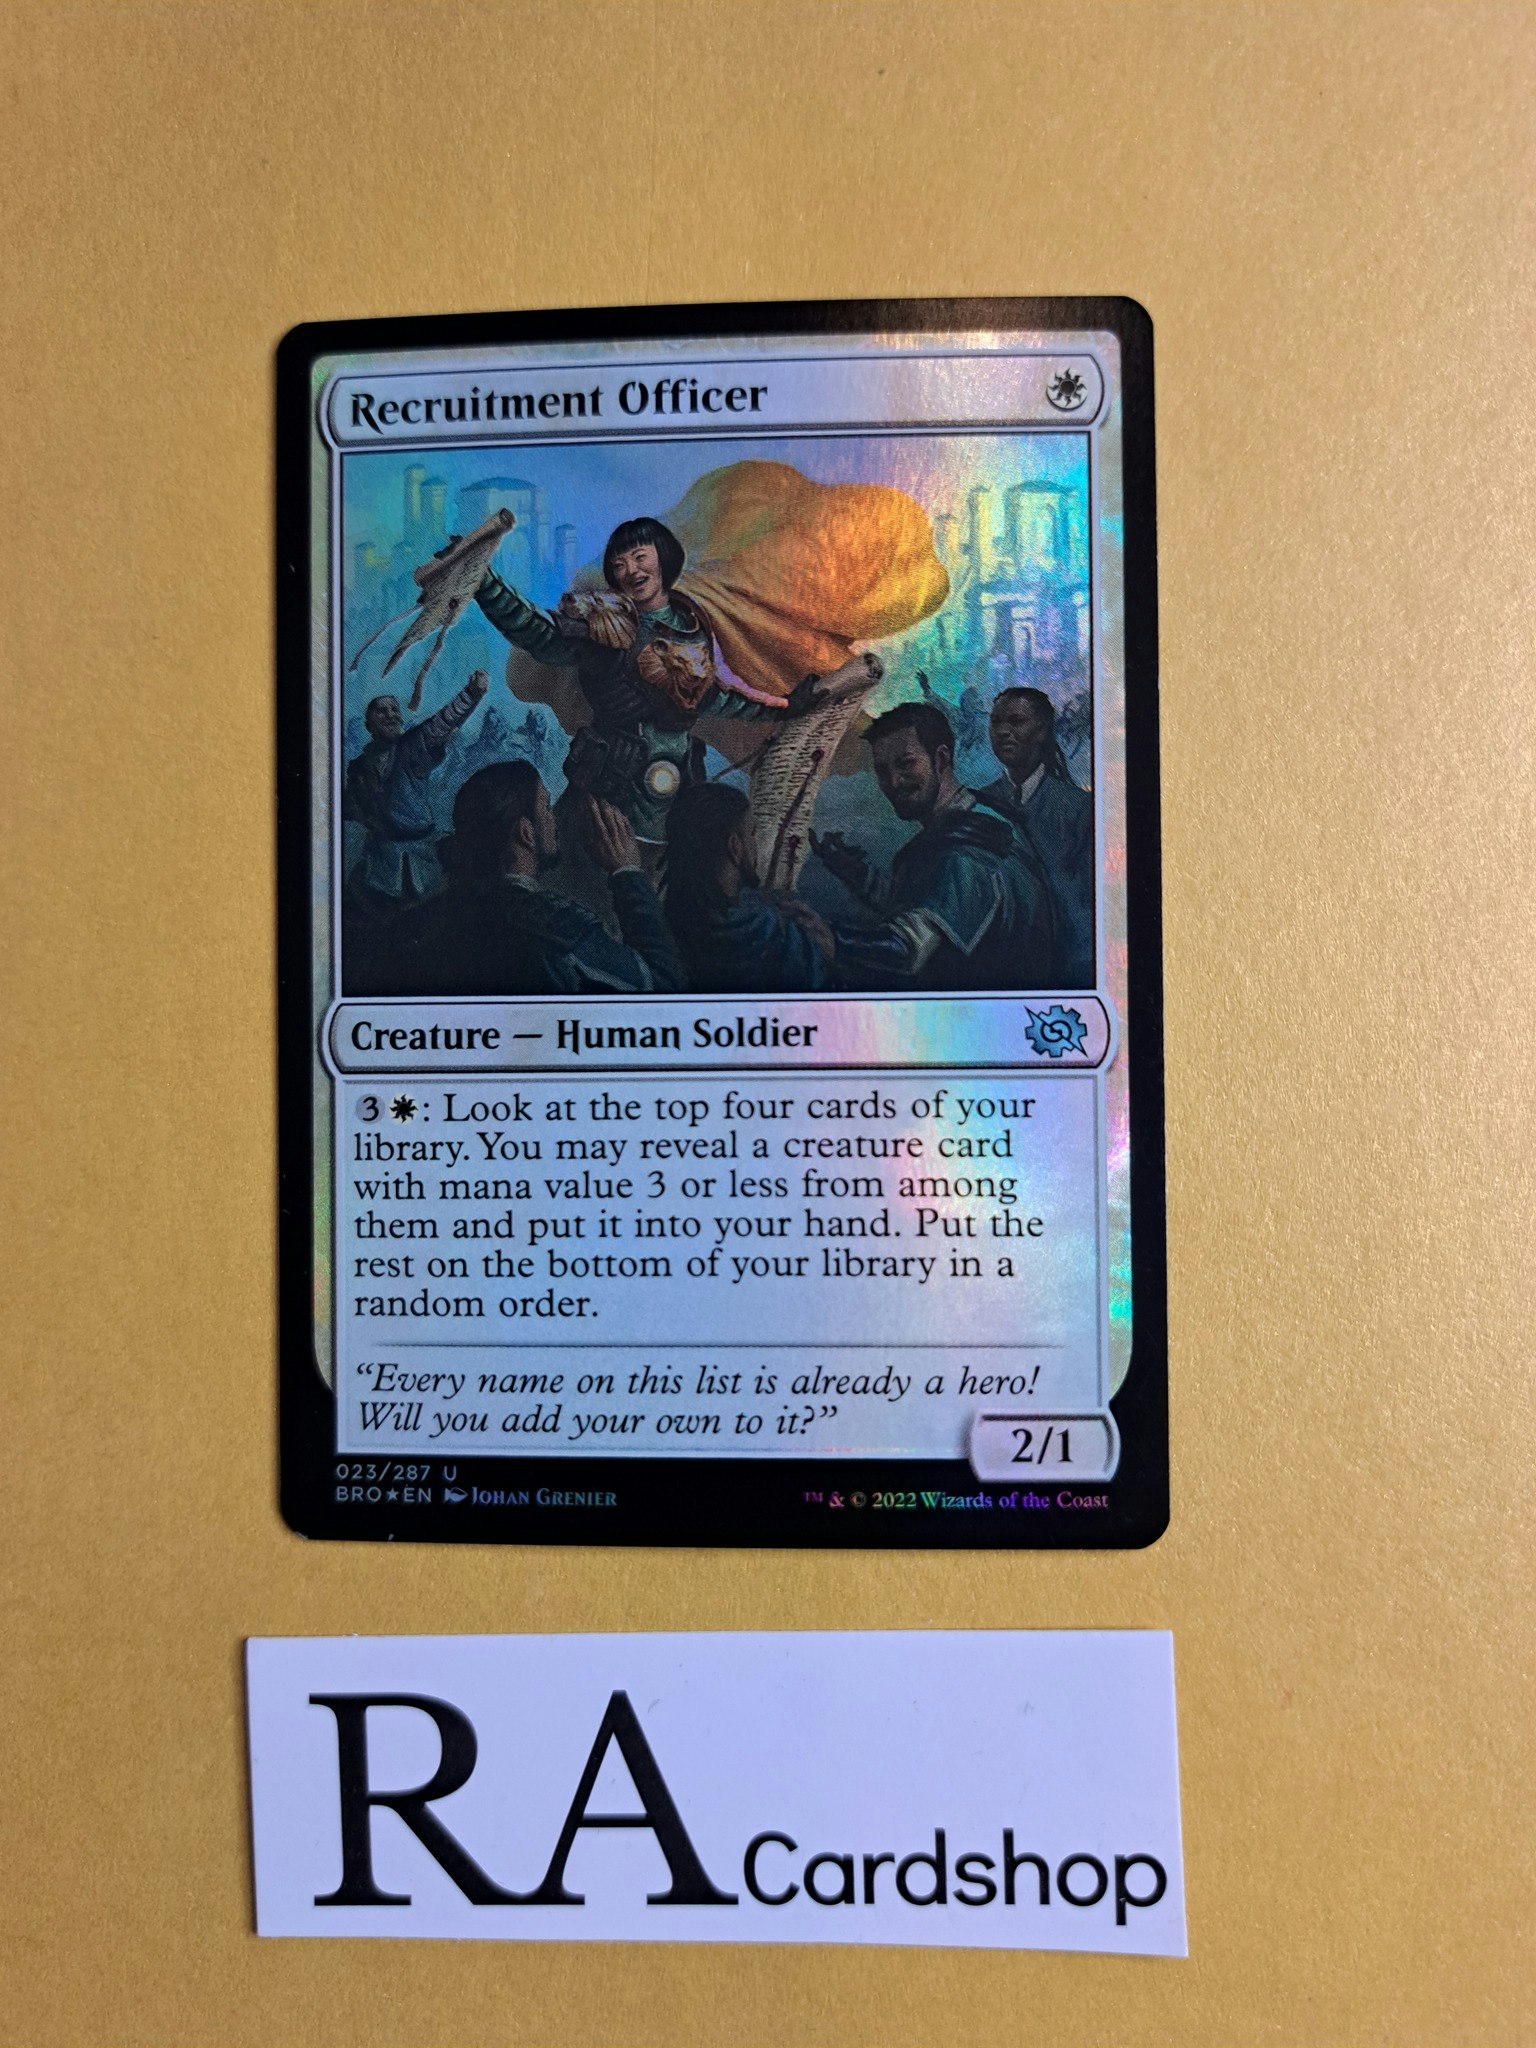 Union of the Third Path Common Foil 031/287 The Brothers War Magic the Gathering